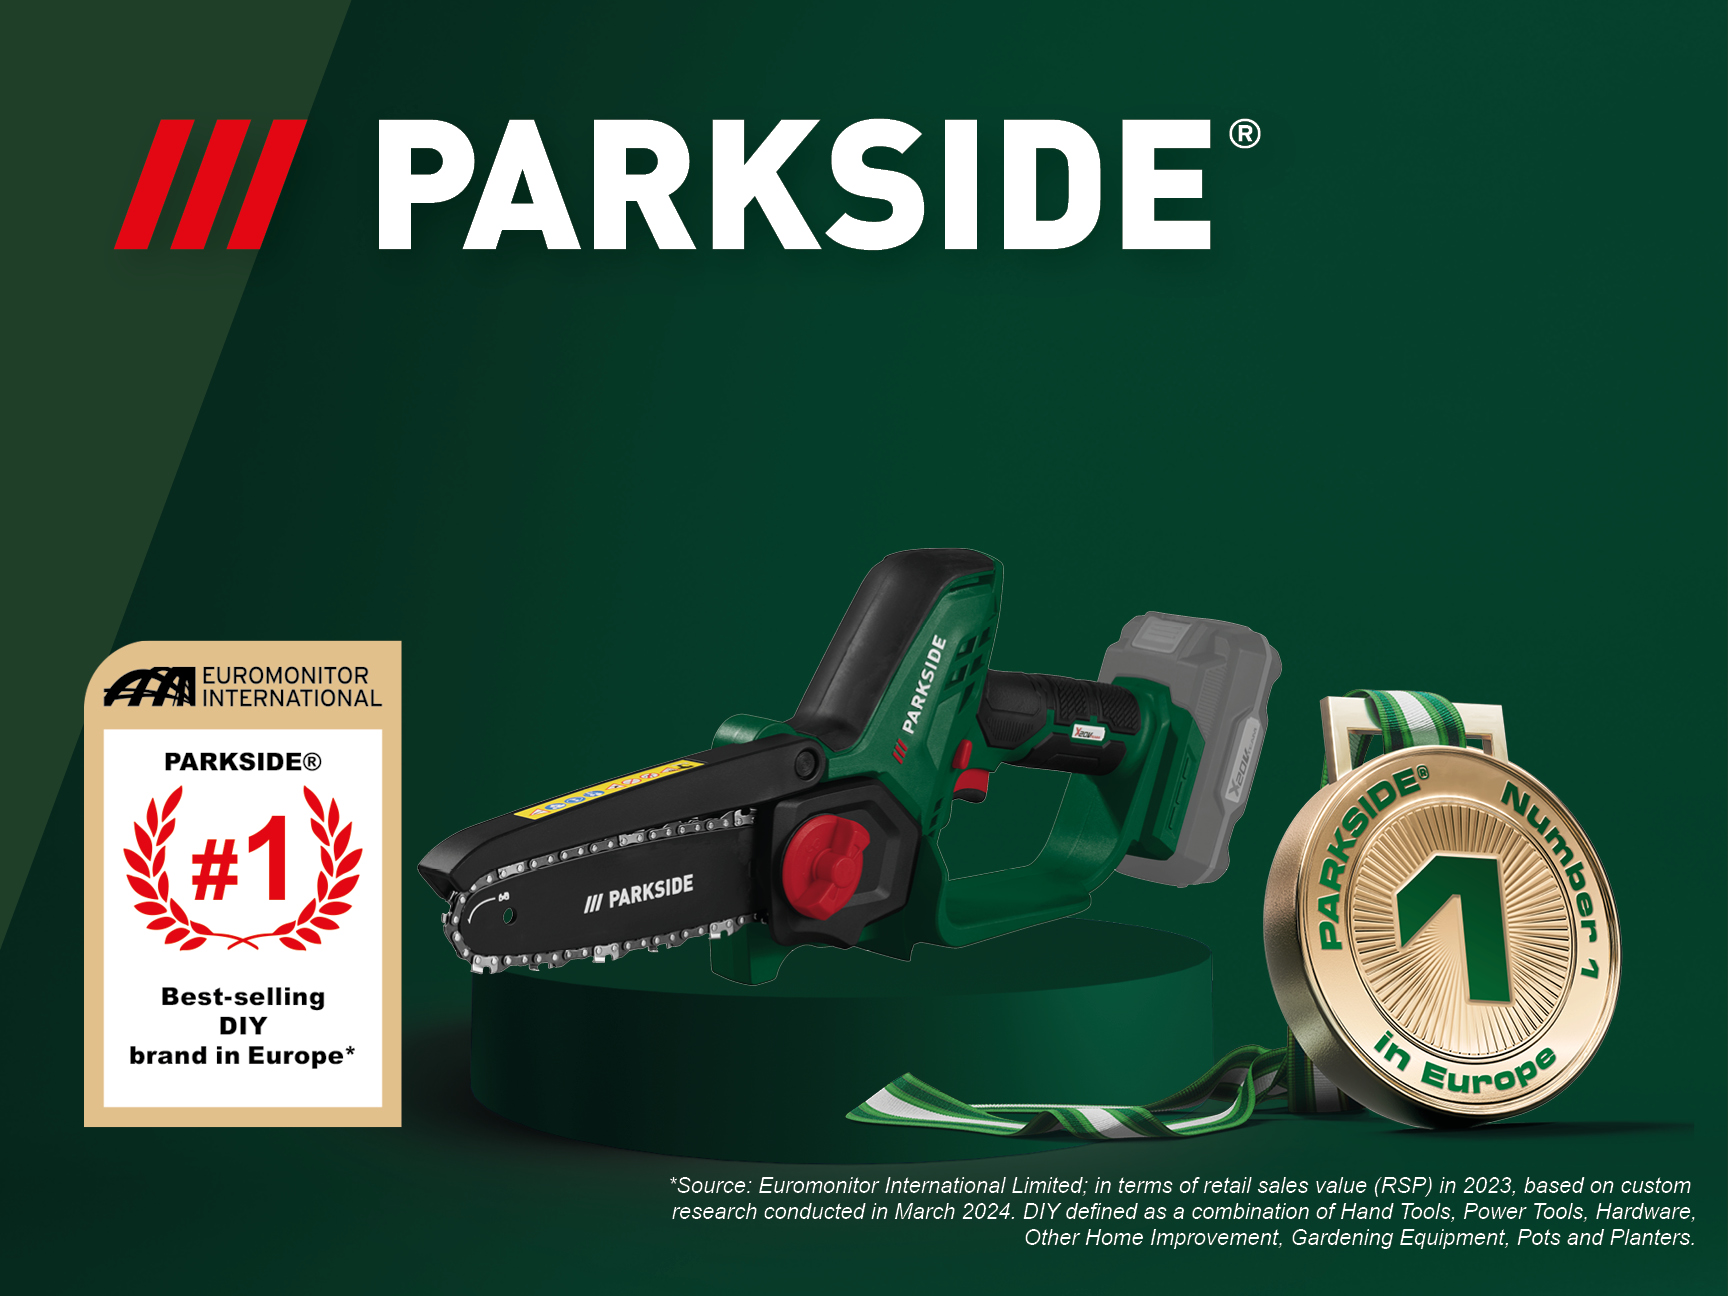 PARKSIDE®: You got the tool for winning